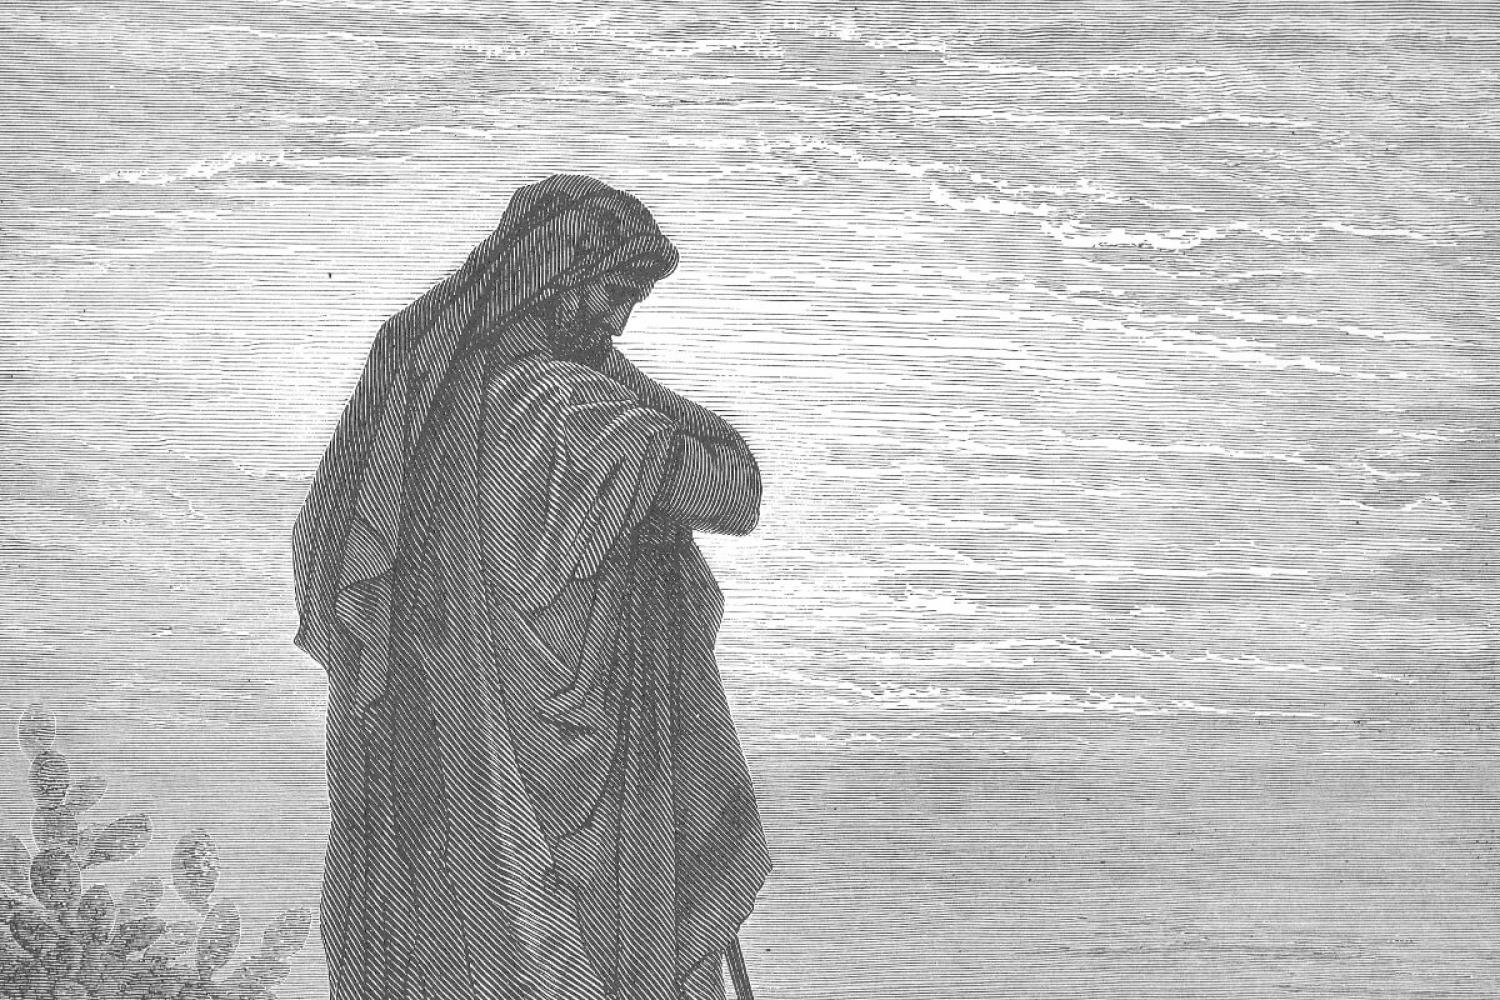 "The Prophet Amos," by Gustave Dore